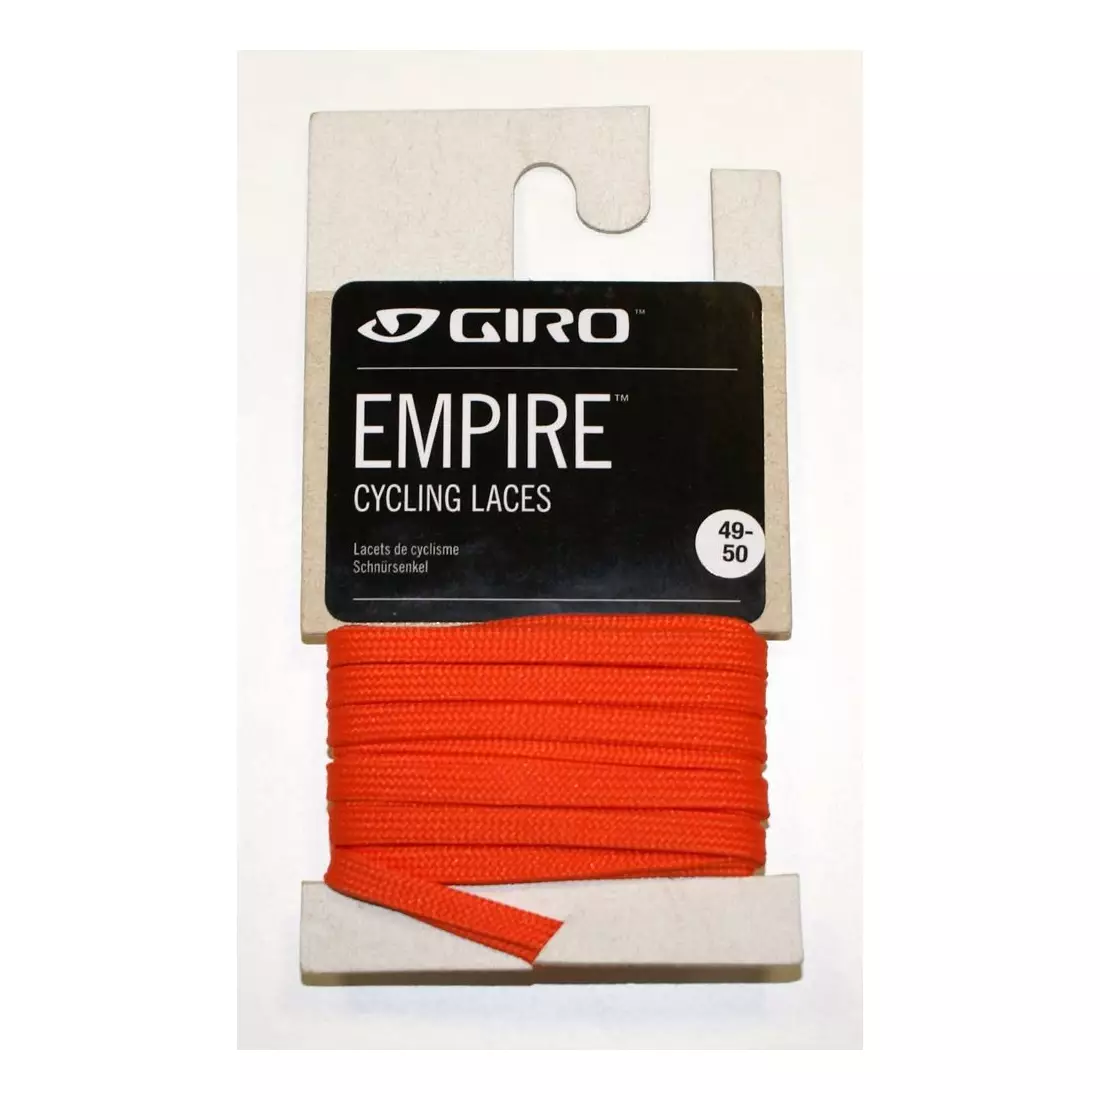 GIRO laces for cycling shoes EMPIRE LACES glowing red GR-7084148